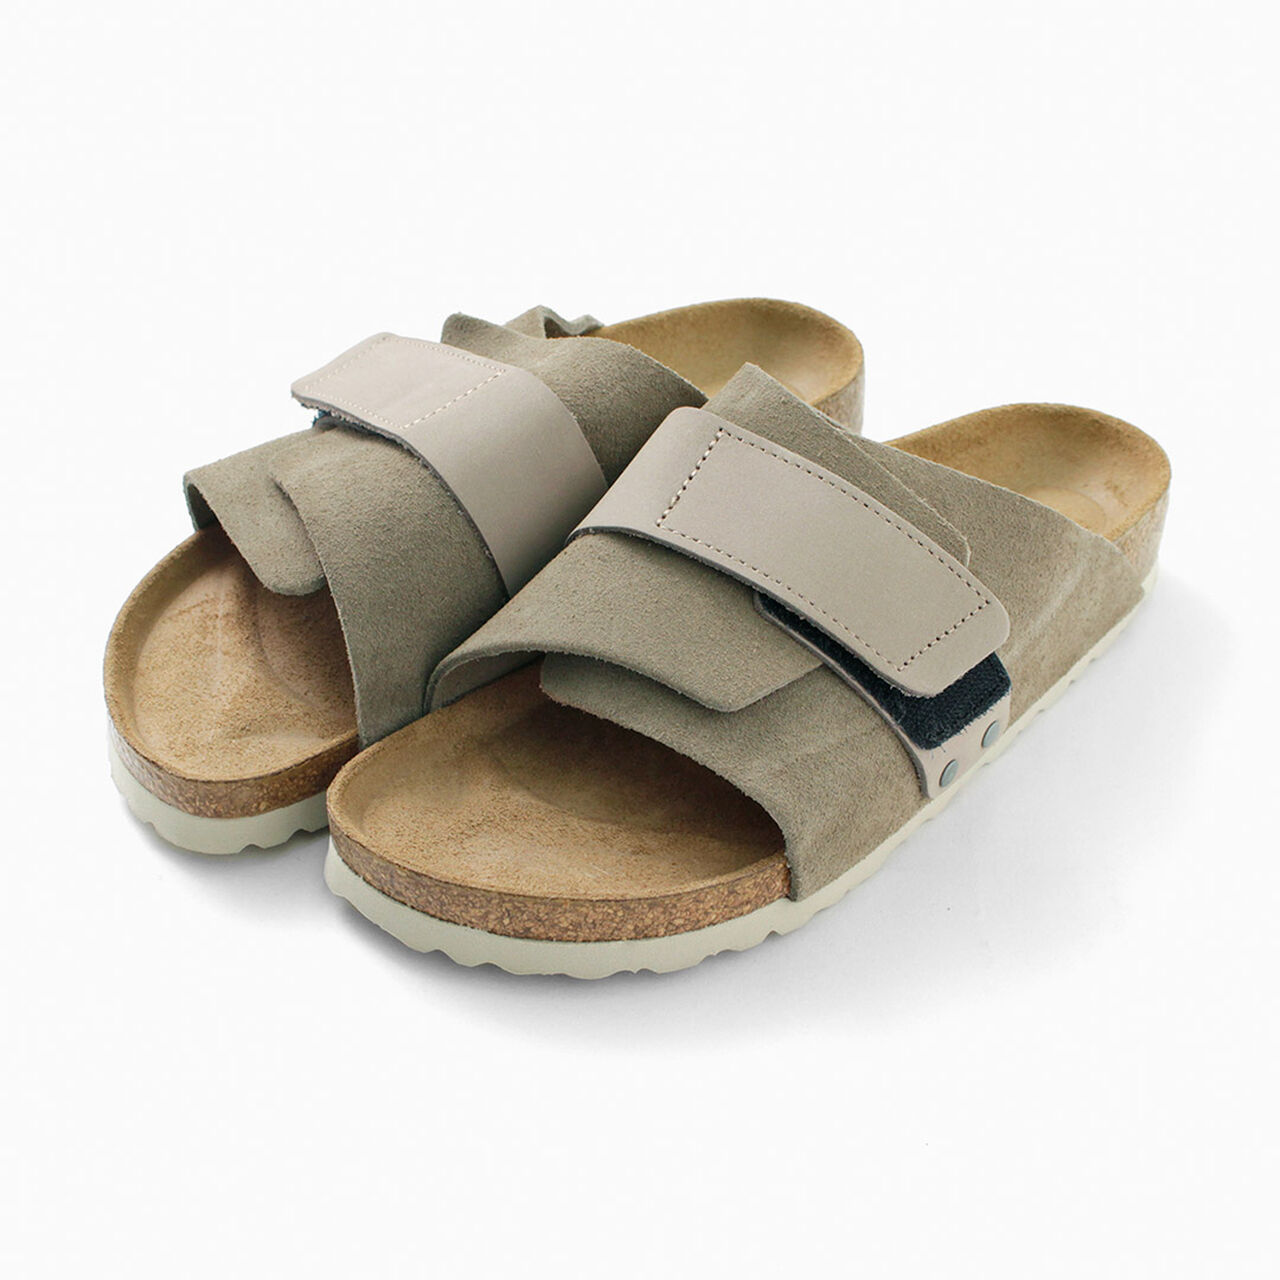 Kyoto Sandals Nubuck Leather Suede,Taupe, large image number 0